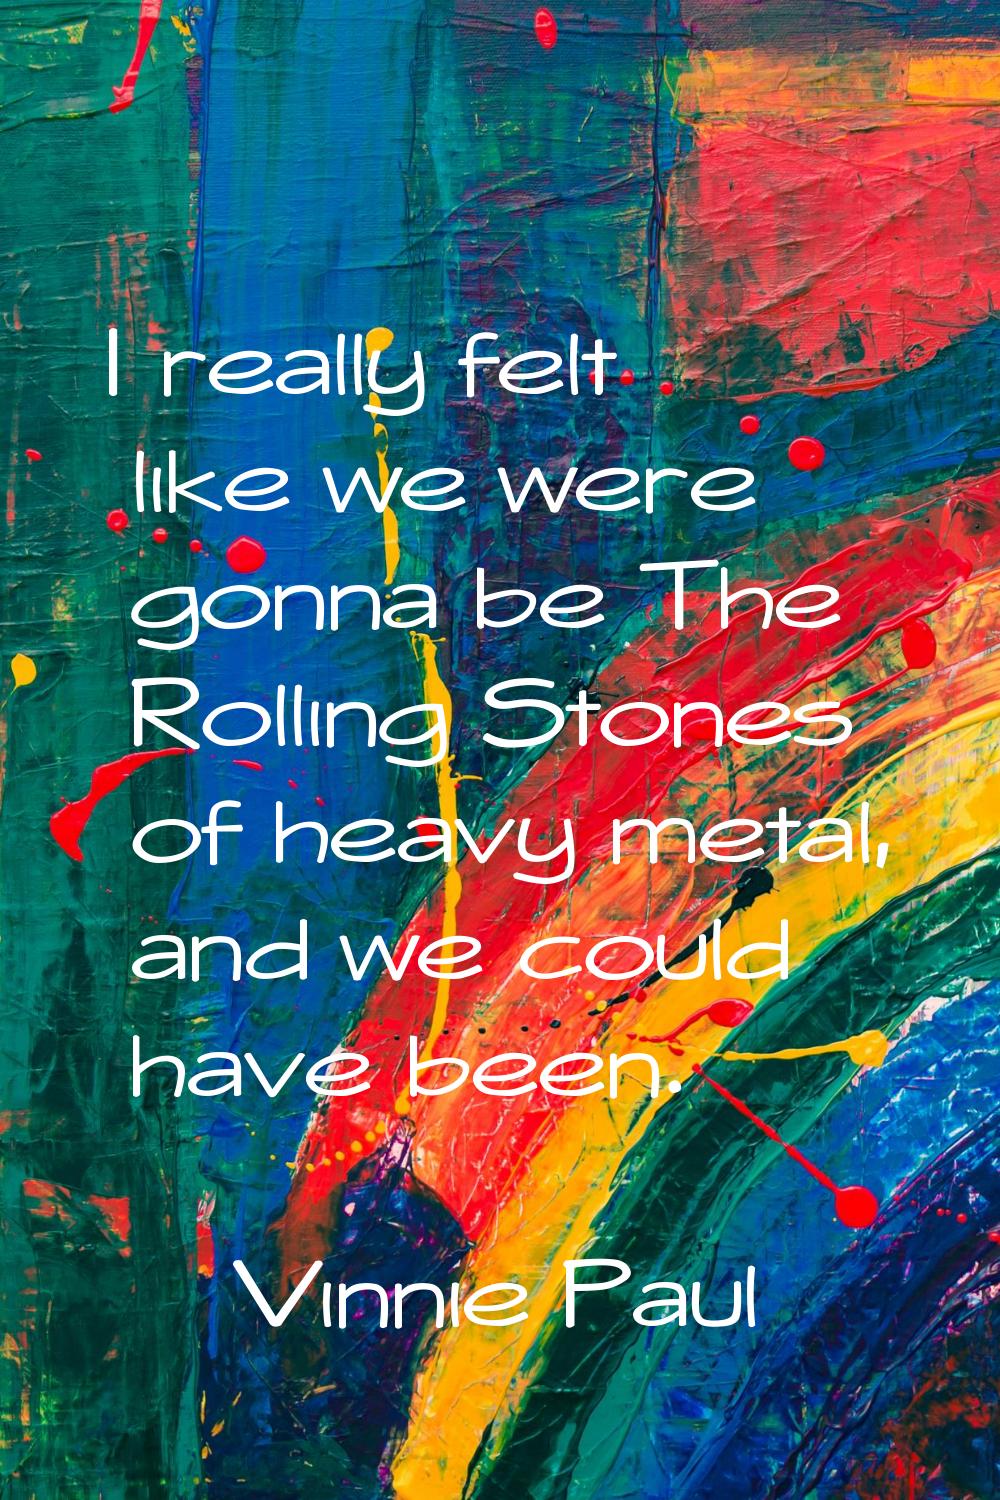 I really felt like we were gonna be The Rolling Stones of heavy metal, and we could have been.